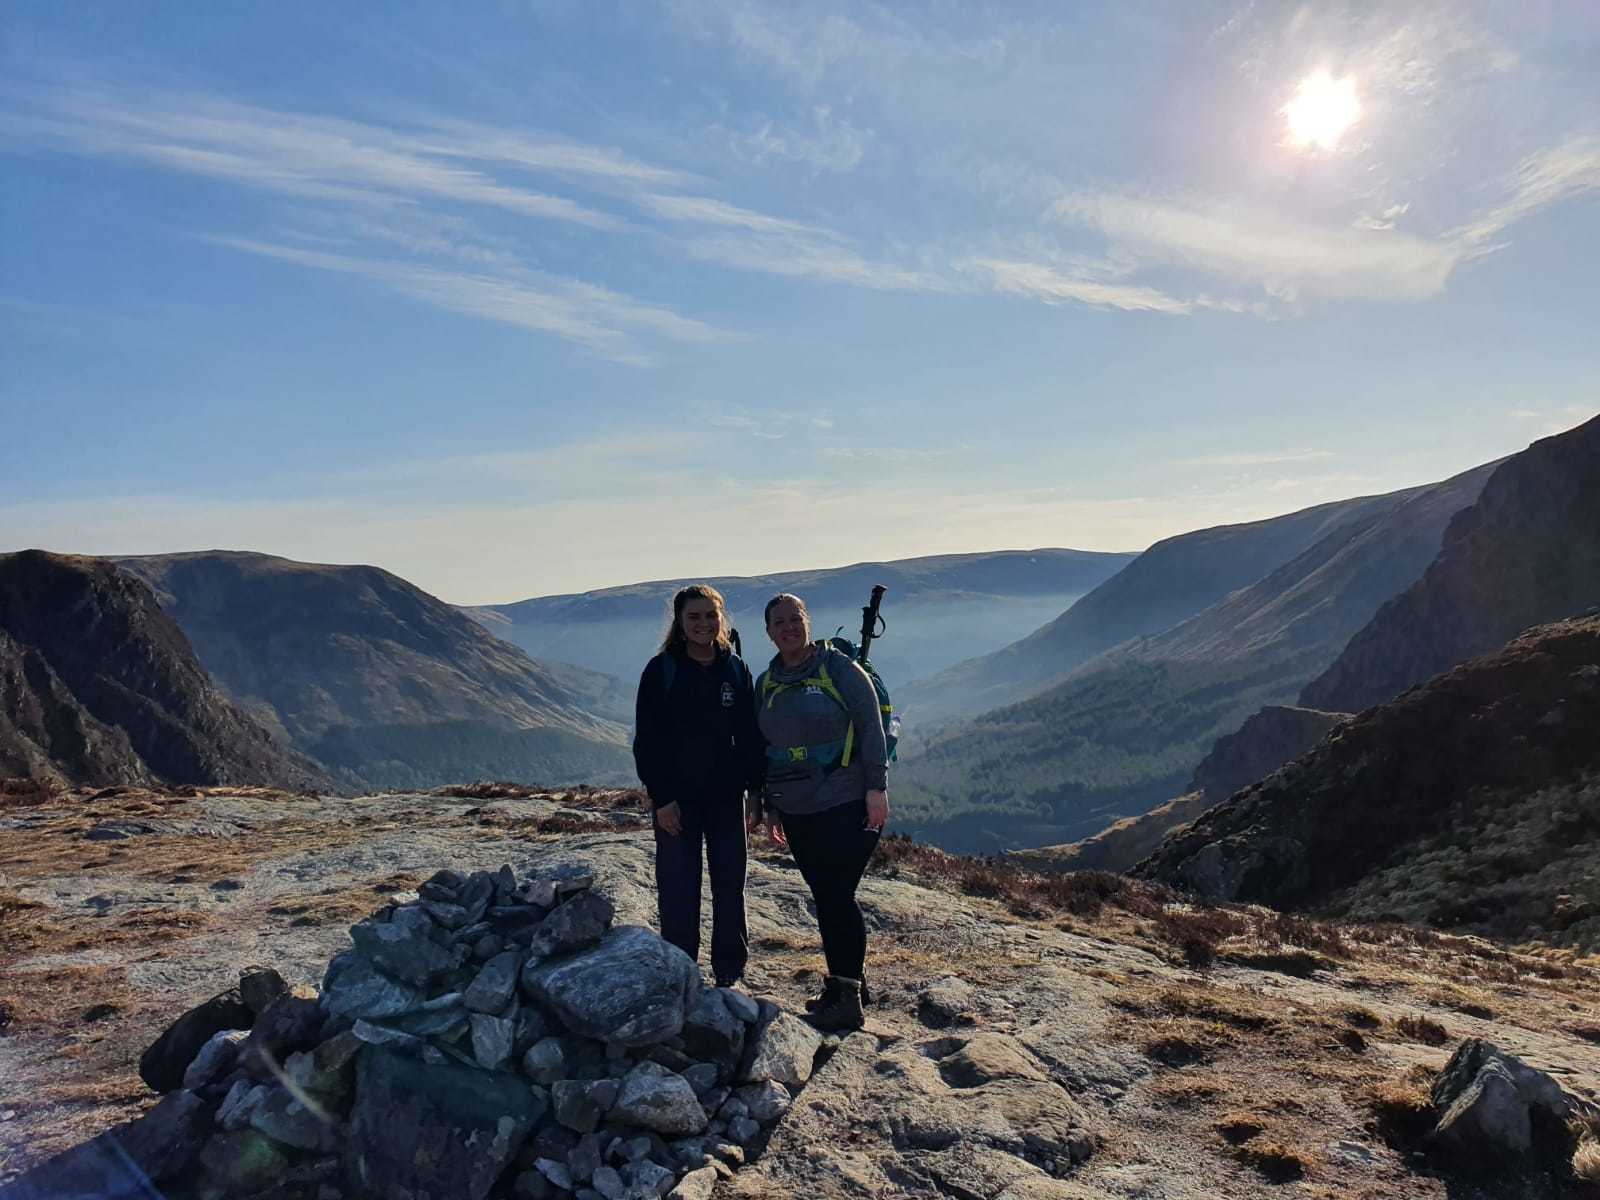 Jodie and Gillian have completed a handful of munros together